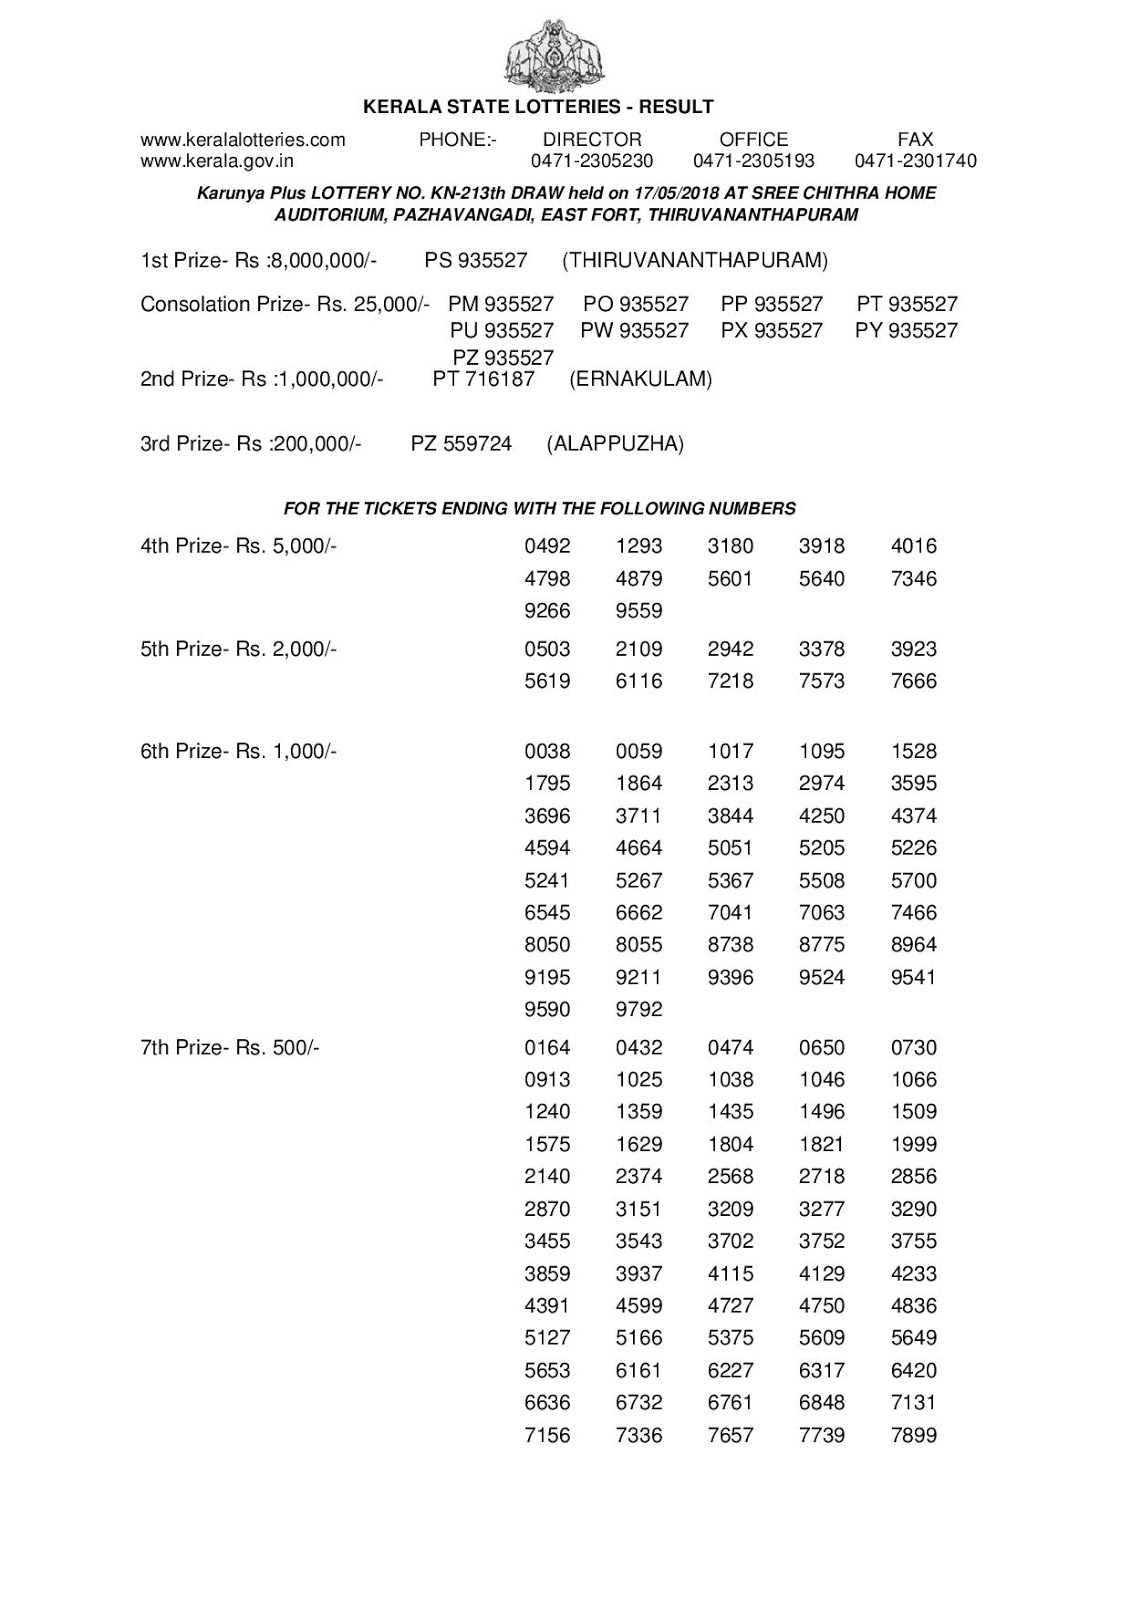 Kerala Lottery Results Today 17.05.2018 Karunya Plus KN-213 Lottery Results Official PDF